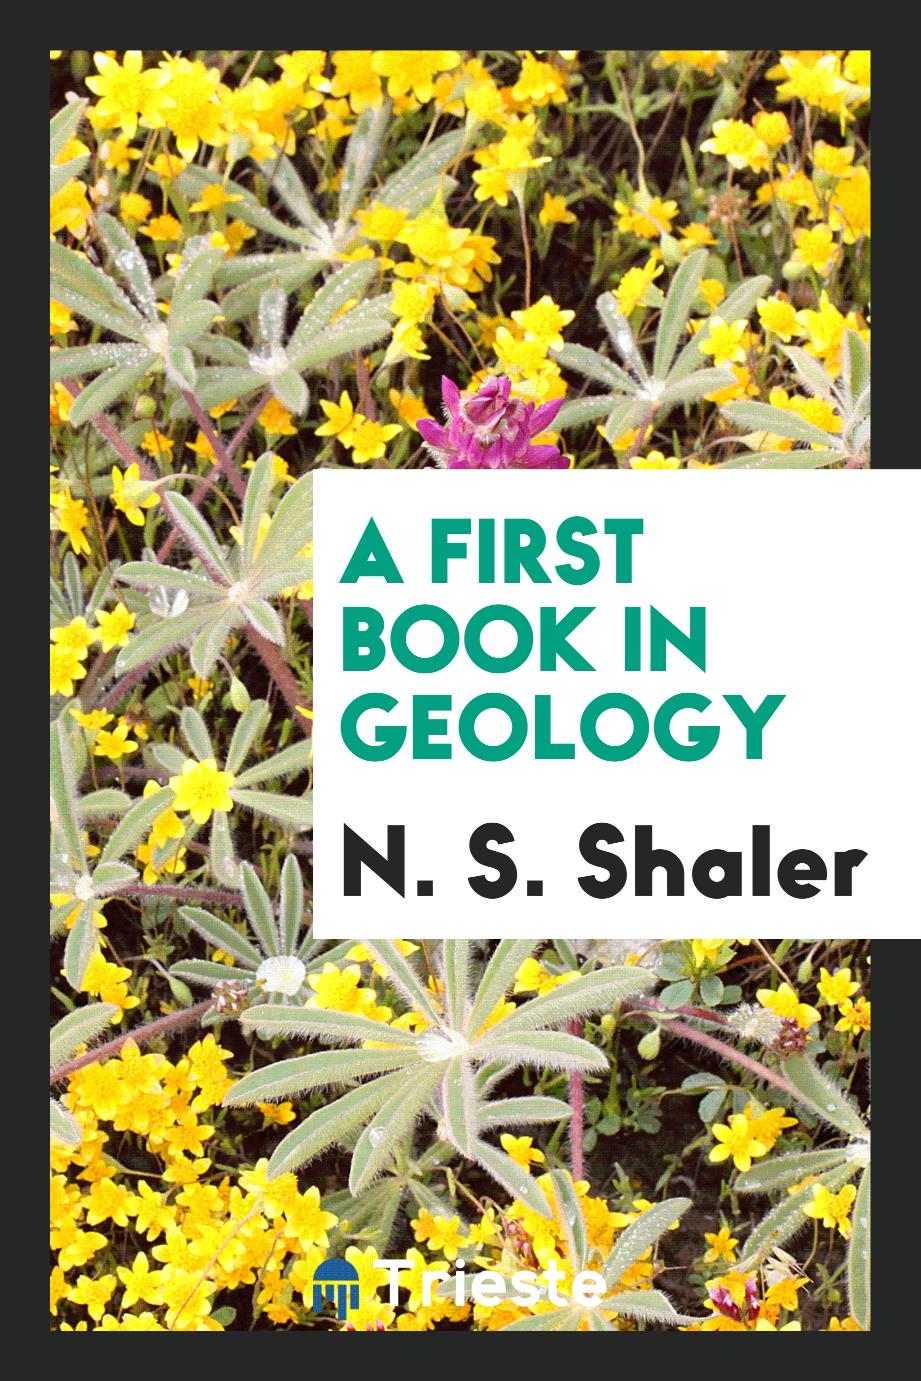 A first book in geology